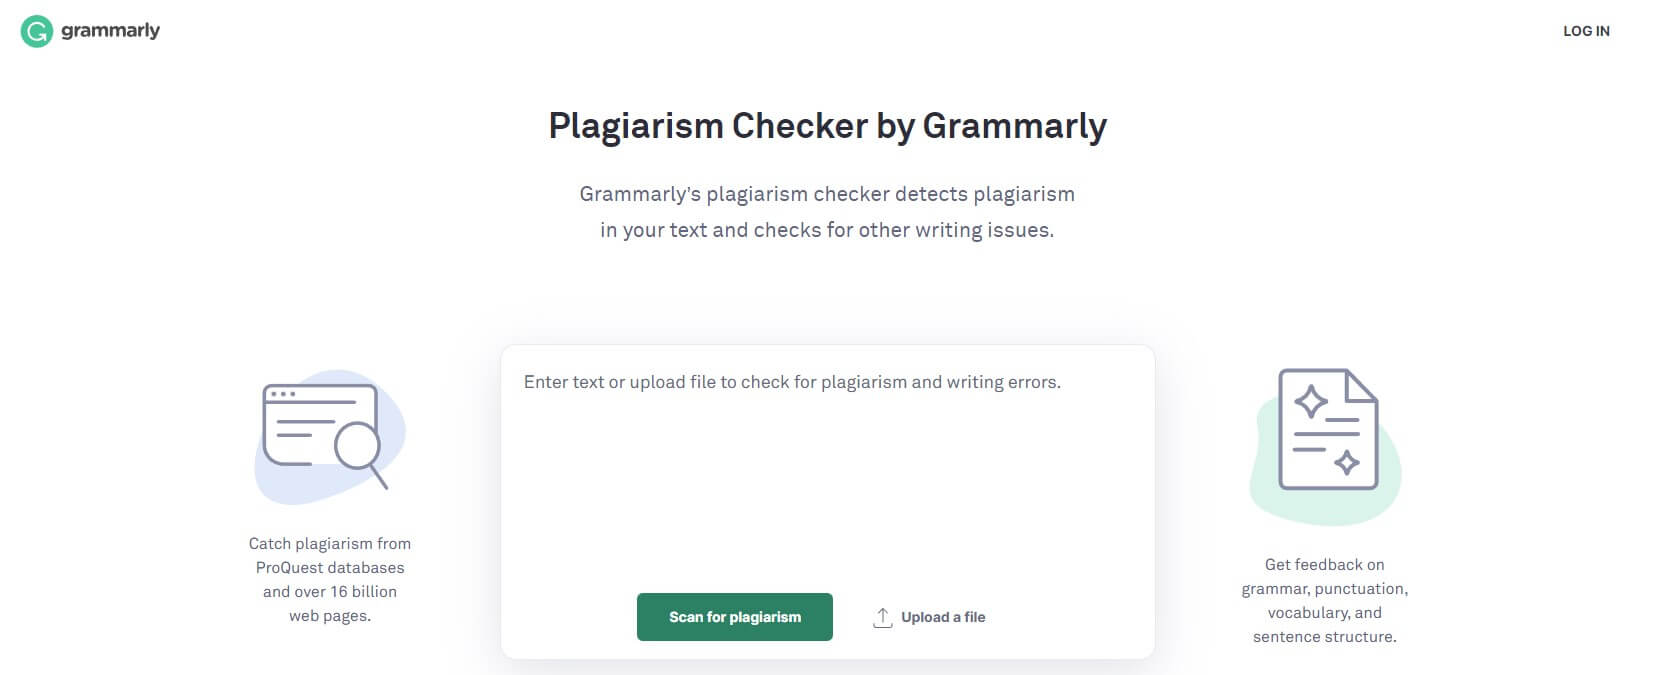 Grammarly Plagiarism Checking Tool